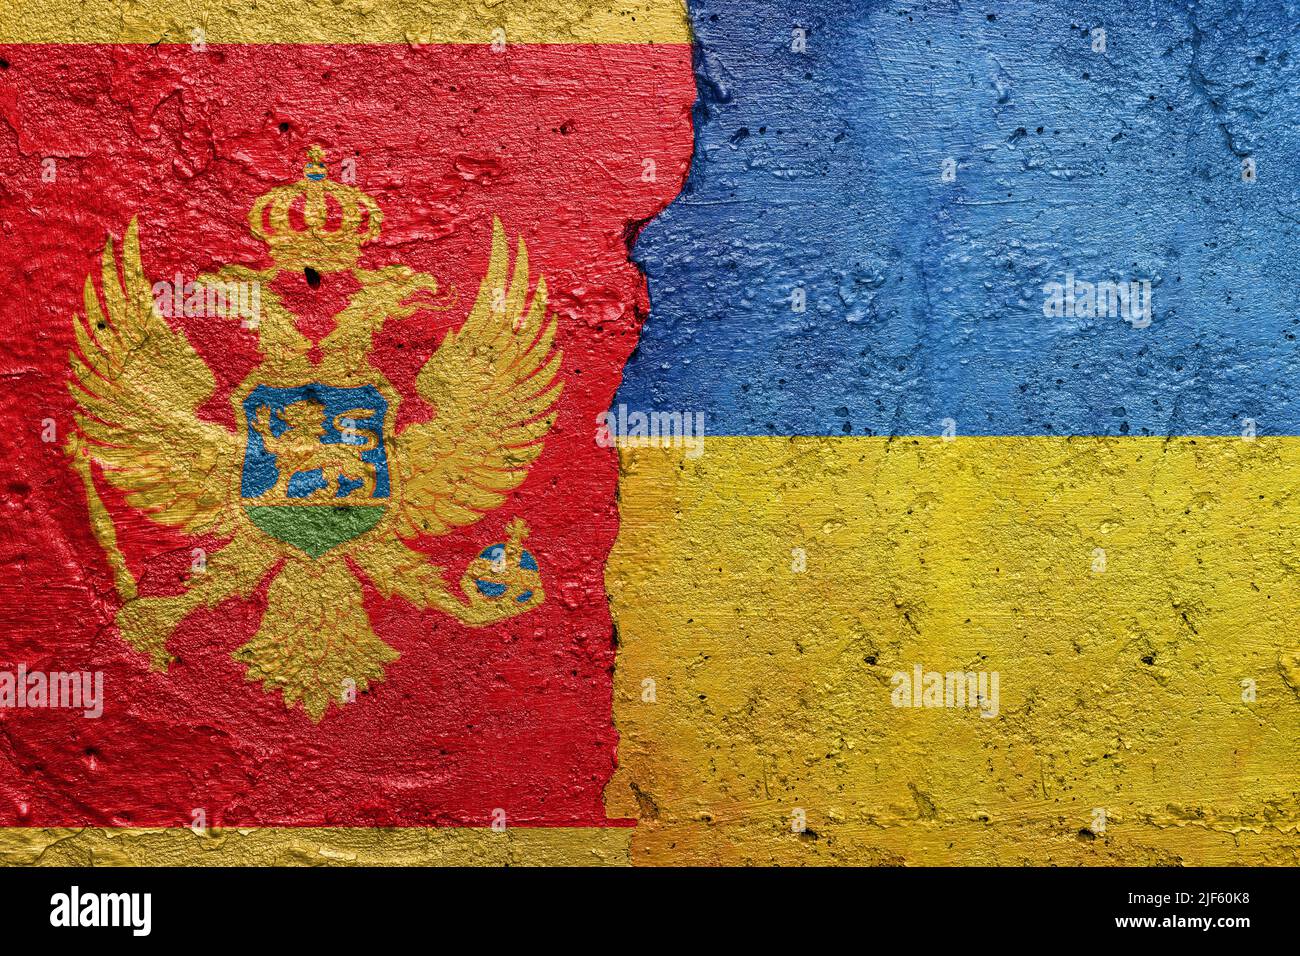 Montenegro and Ukraine - Cracked concrete wall painted with a Montenegrin flag on the left and a Ukrainian flag on the right Stock Photo